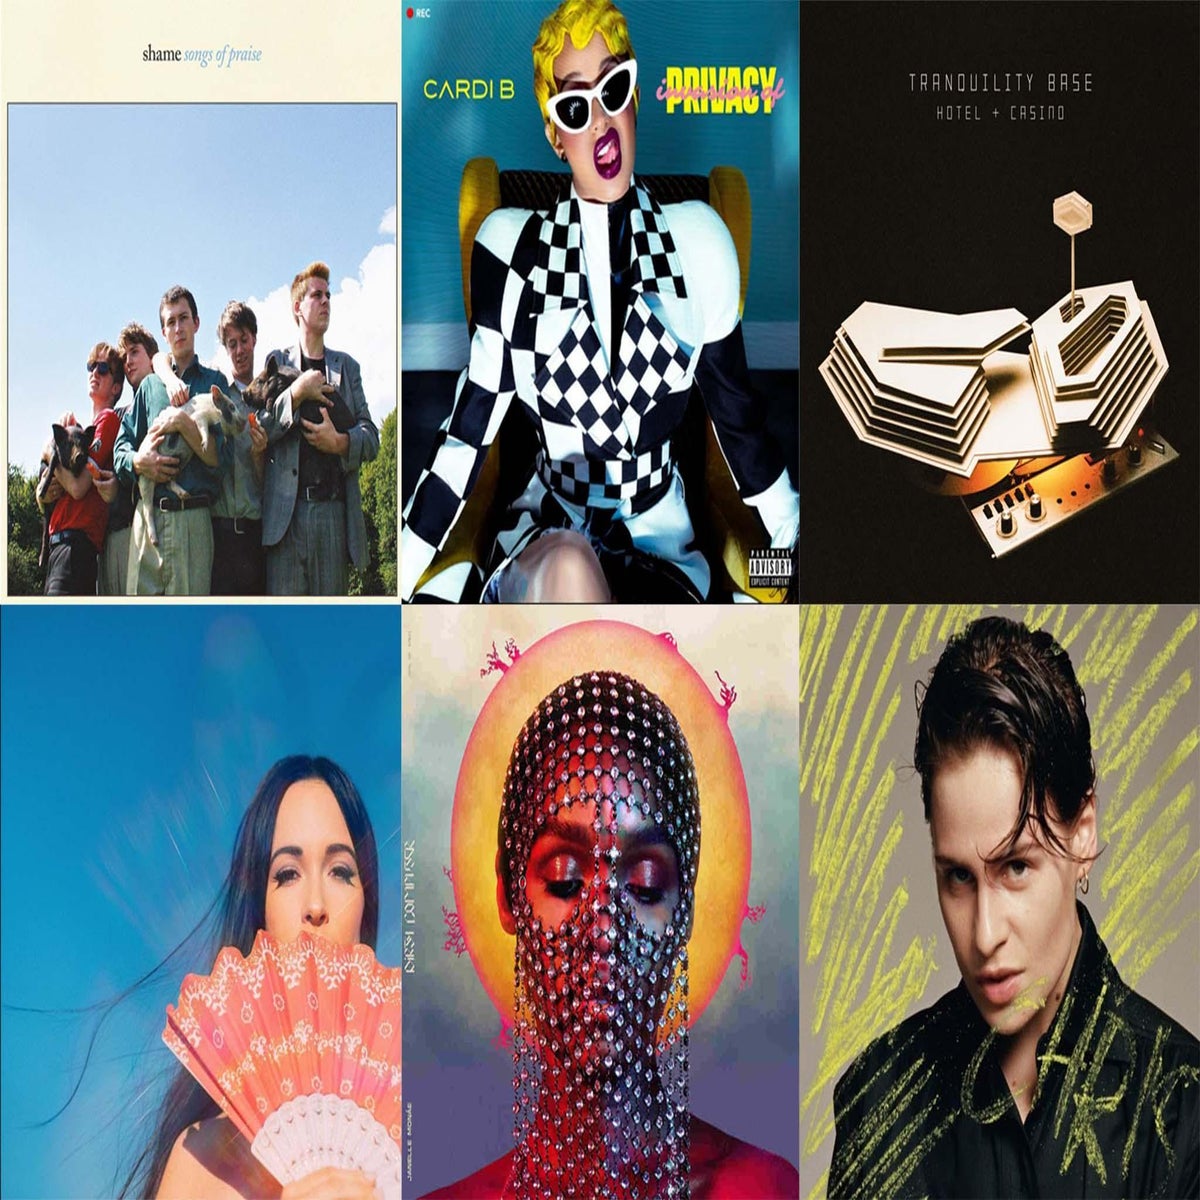 Among their 5 albums, which album cover best represents the songs